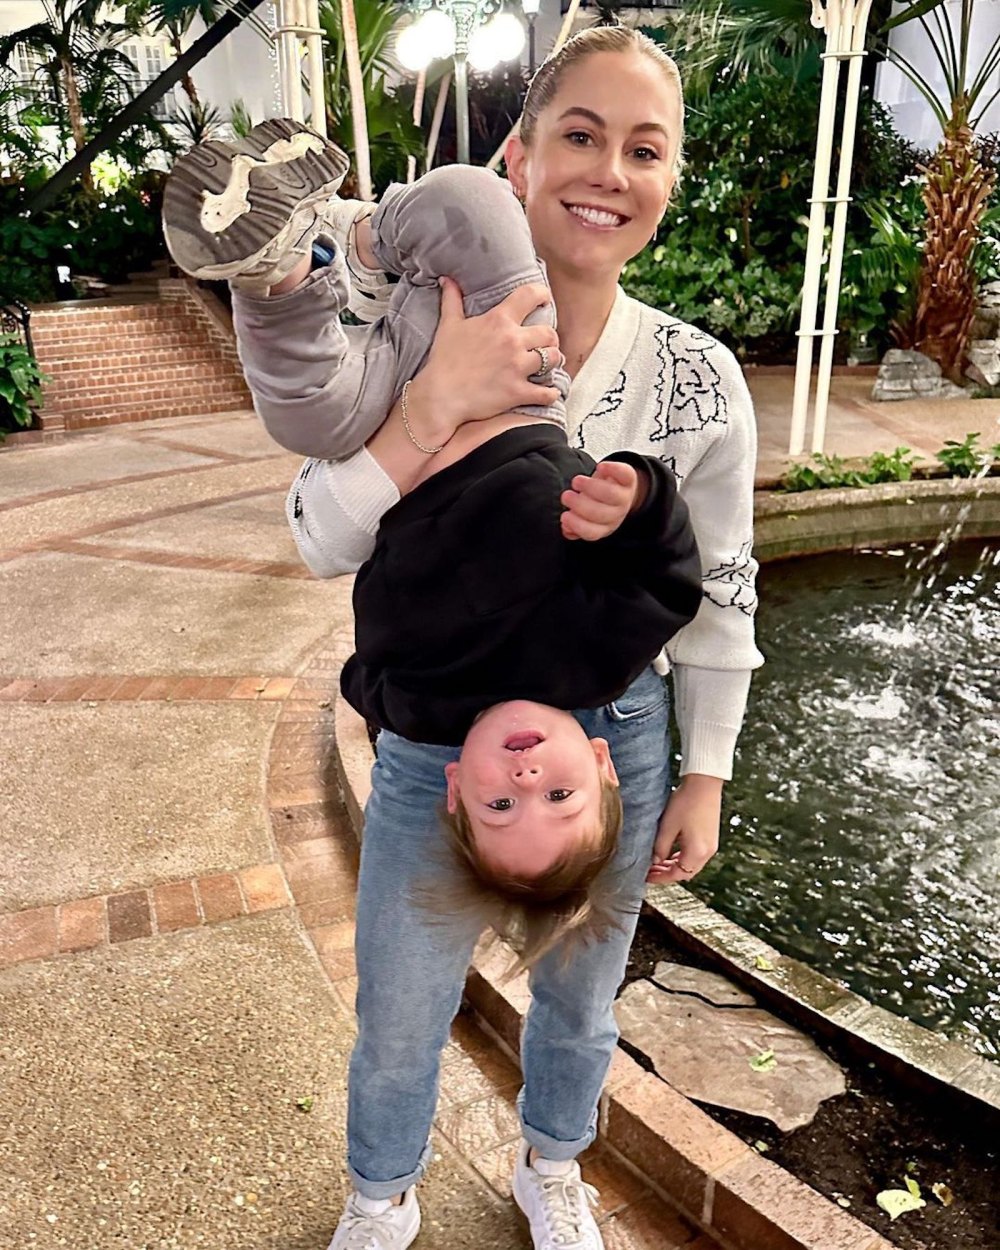 Shawn Johnson’s Son Jett Goes to Emergency Room After Hitting Eyebrow: ‘Good Little Scar’